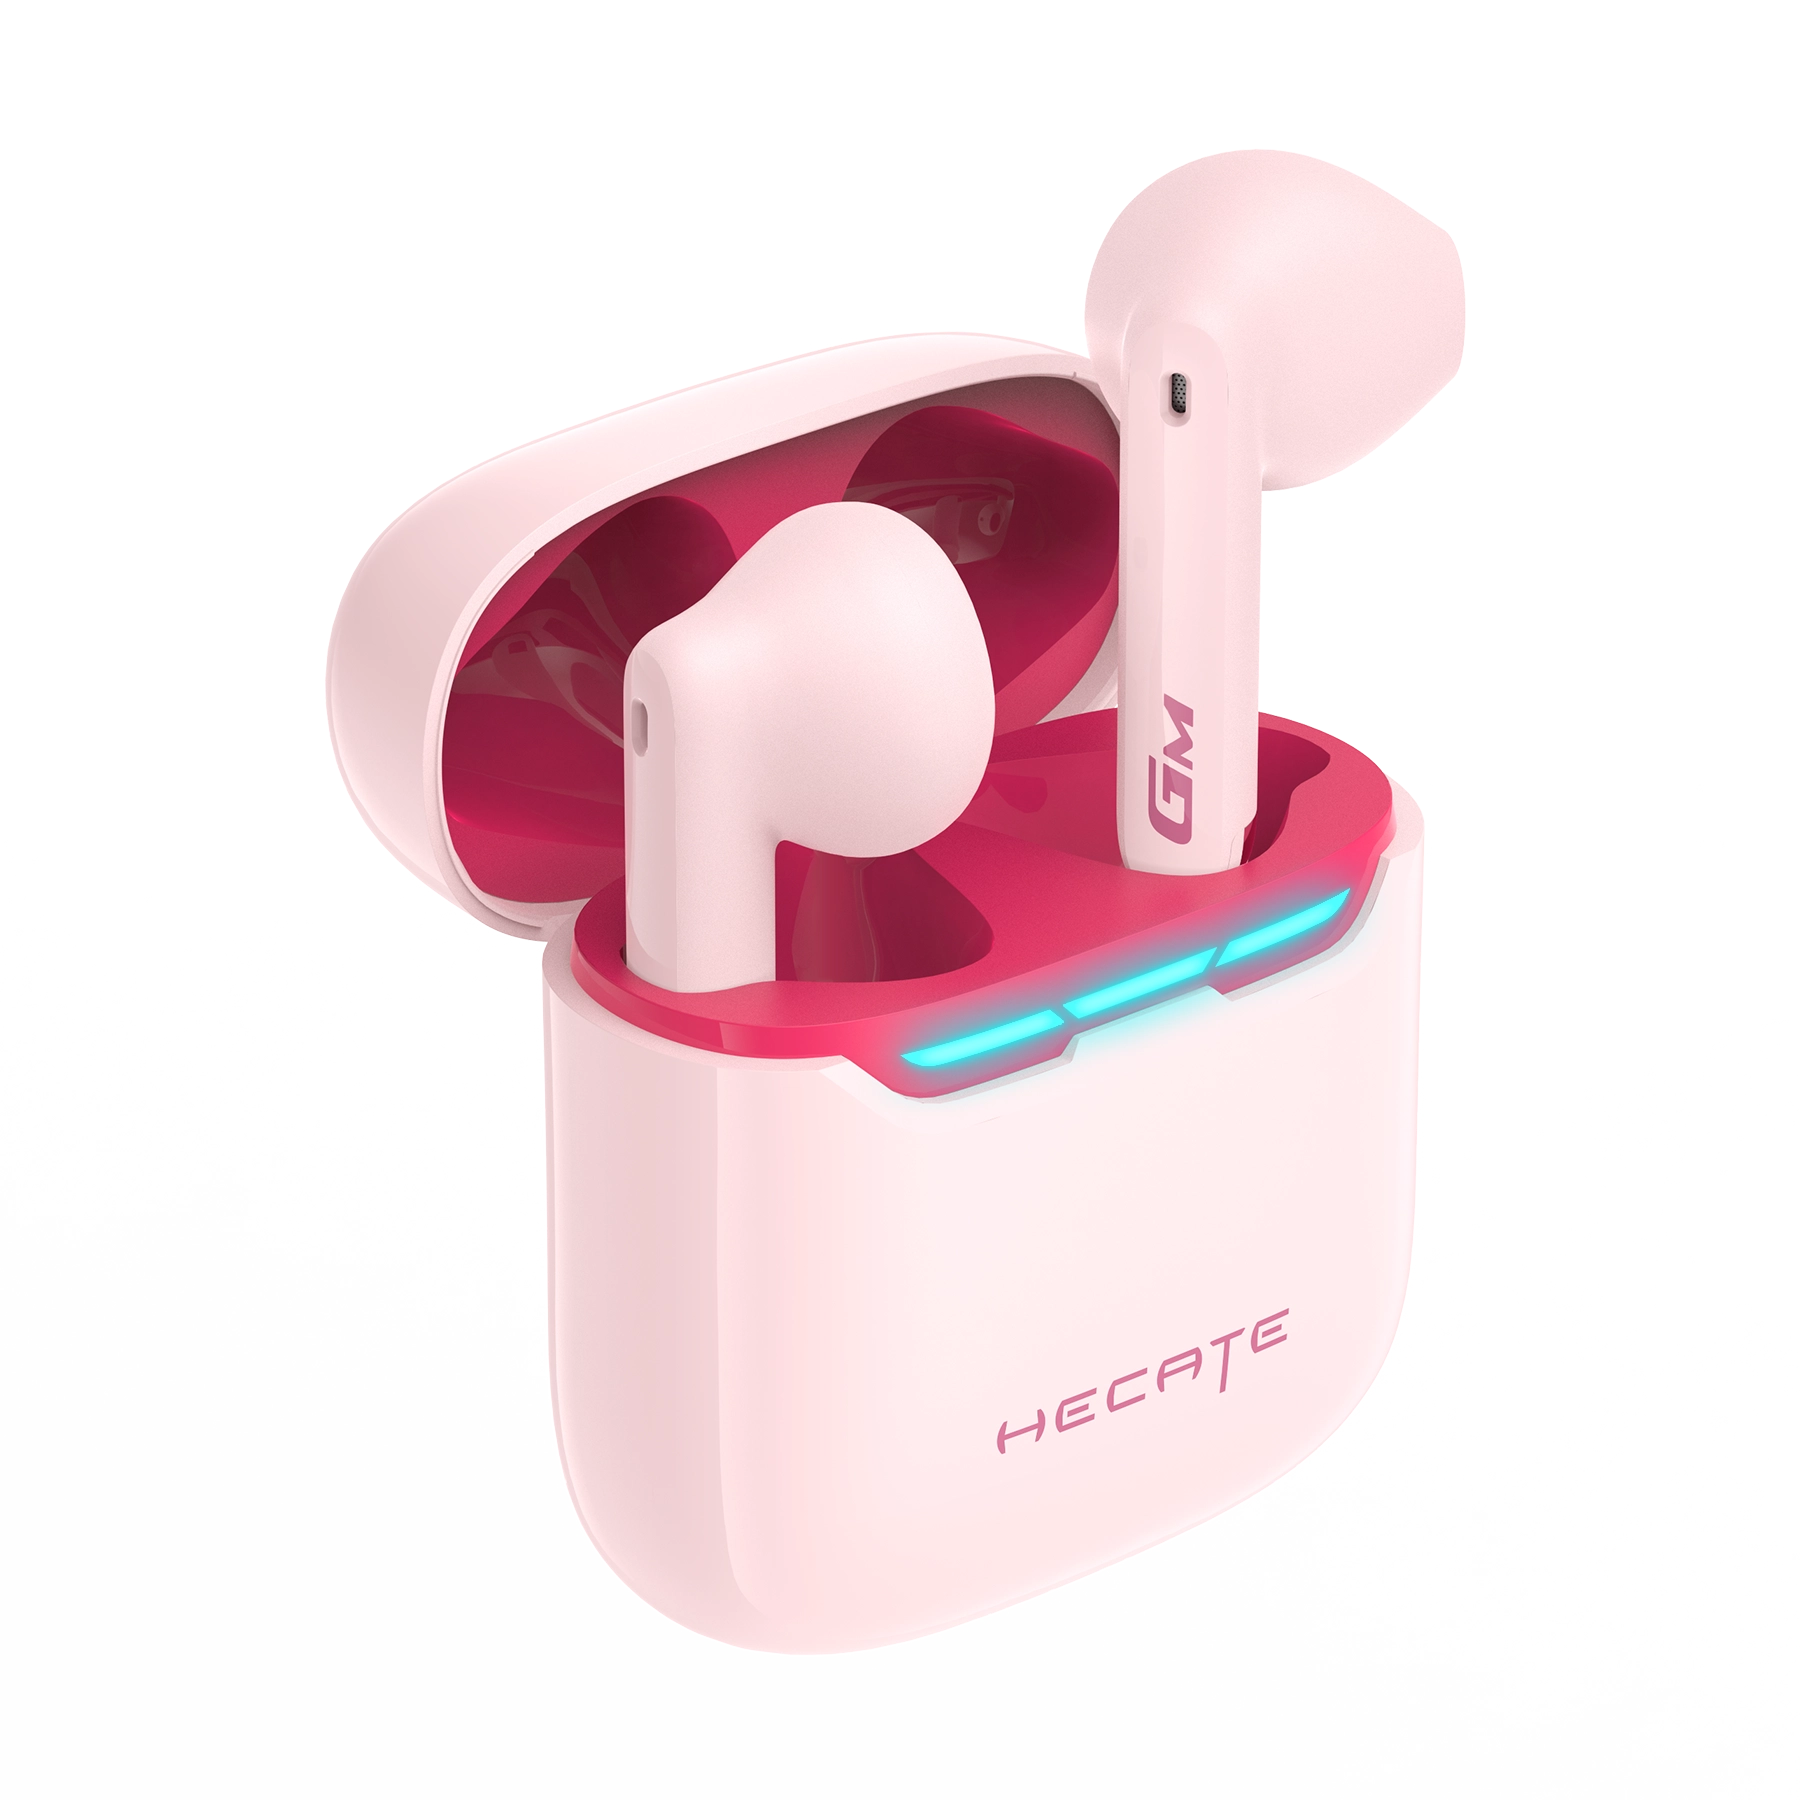 GM3 Plus Wireless Earbuds Product Pictures pink_4